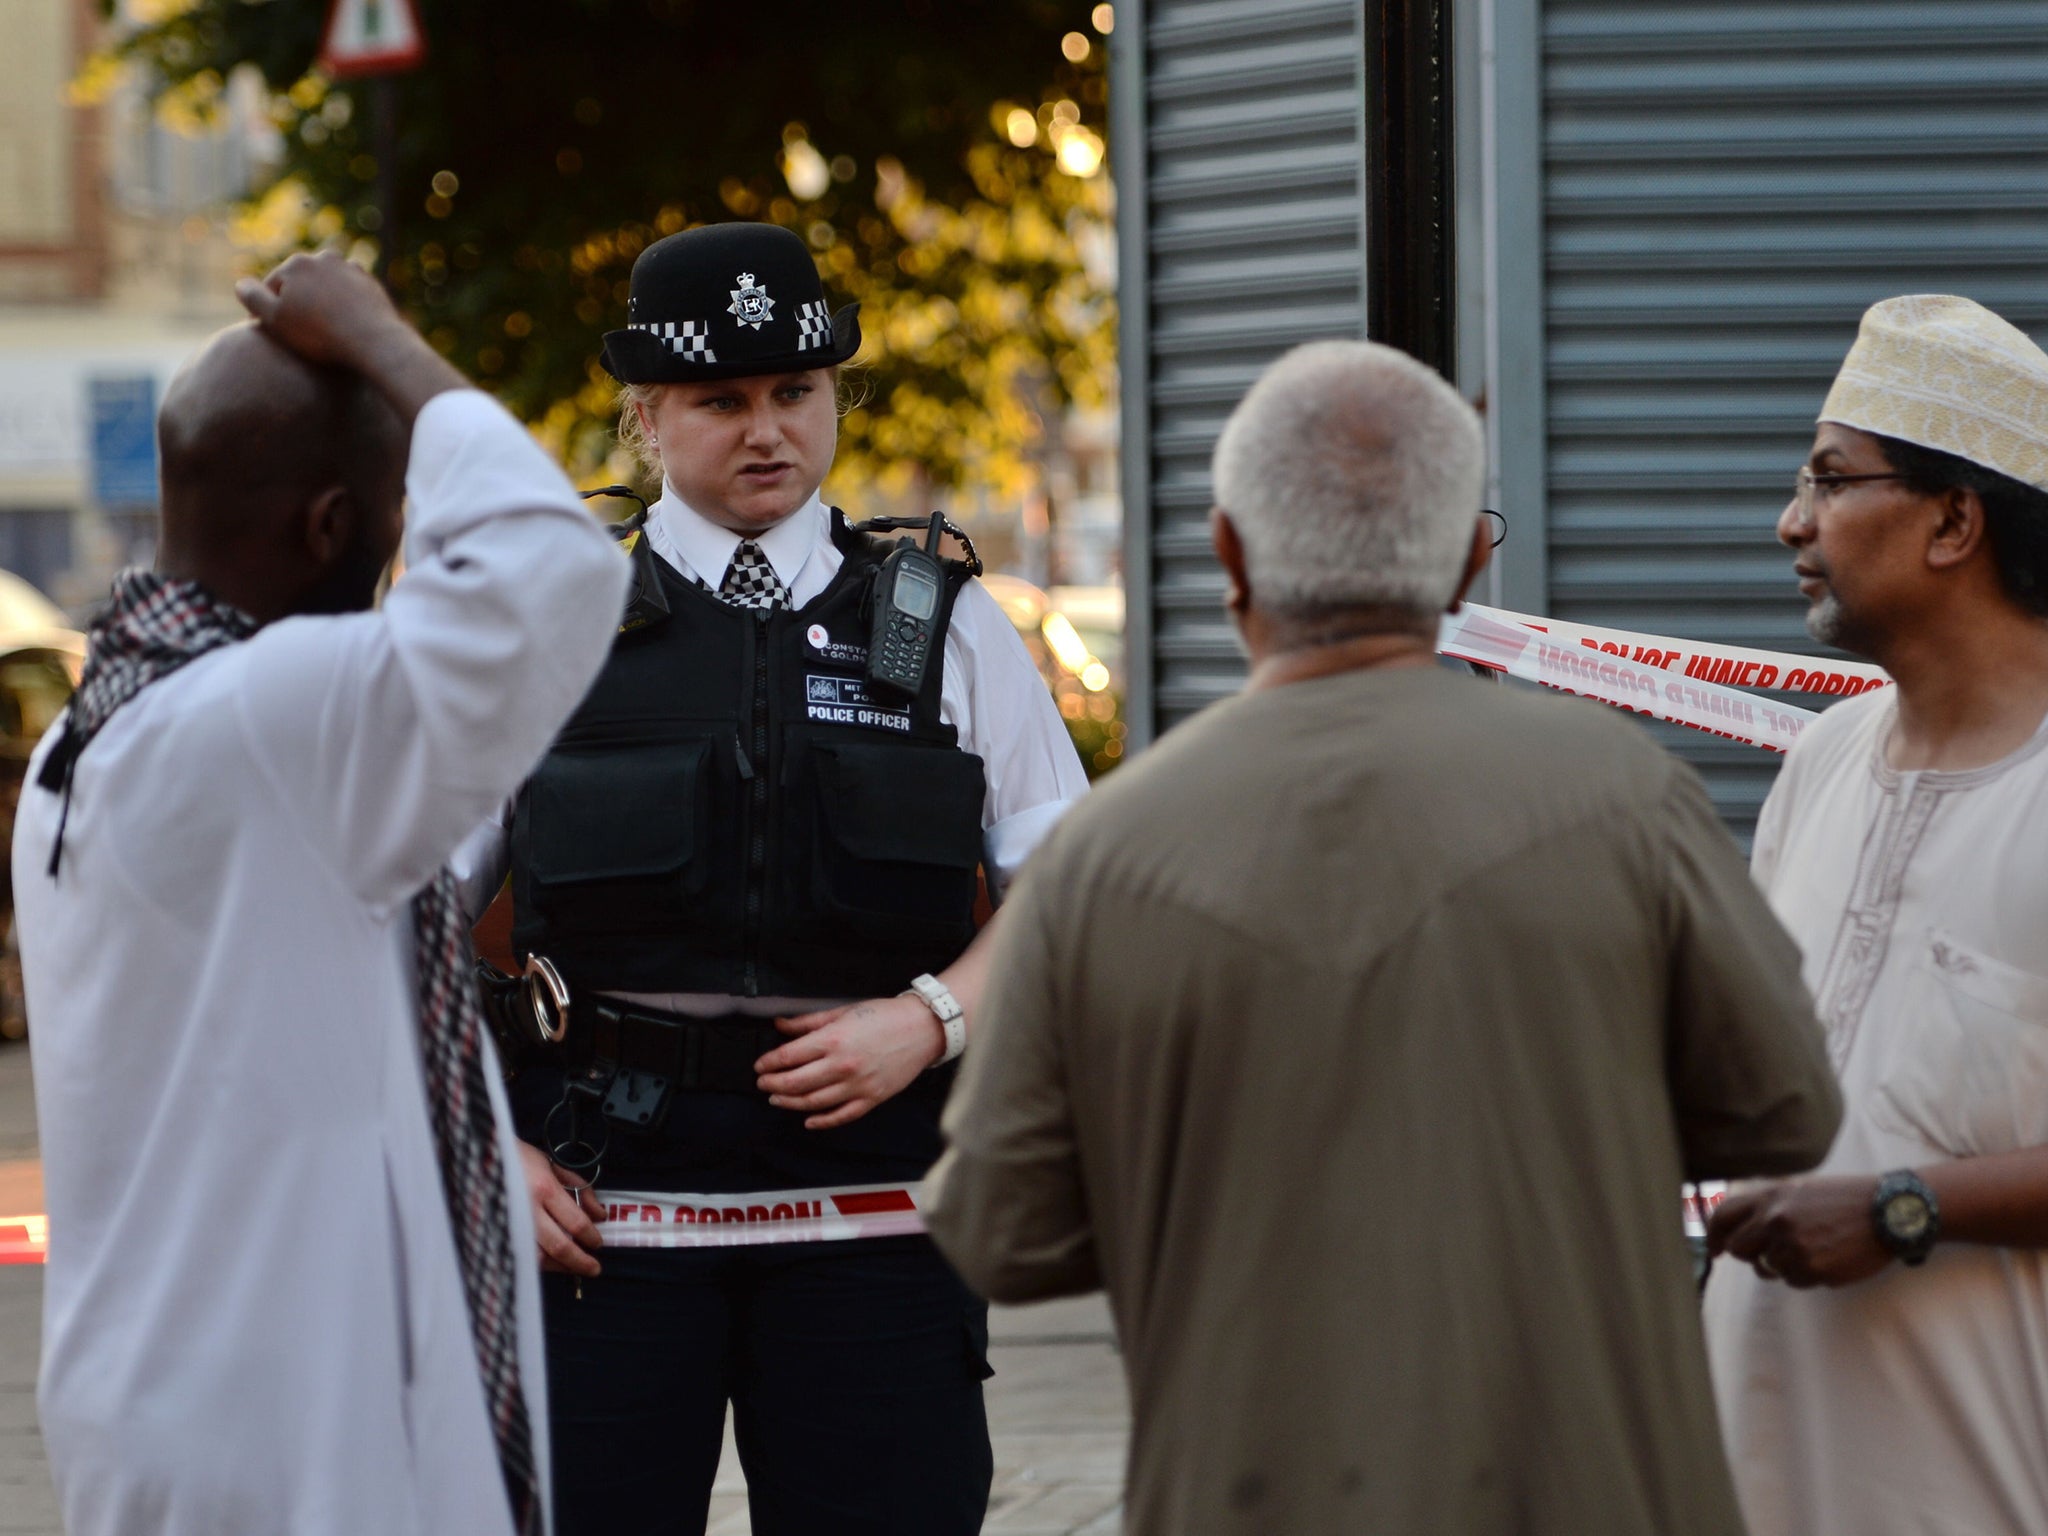 Police talk to local people at Finsbury Park after the attack